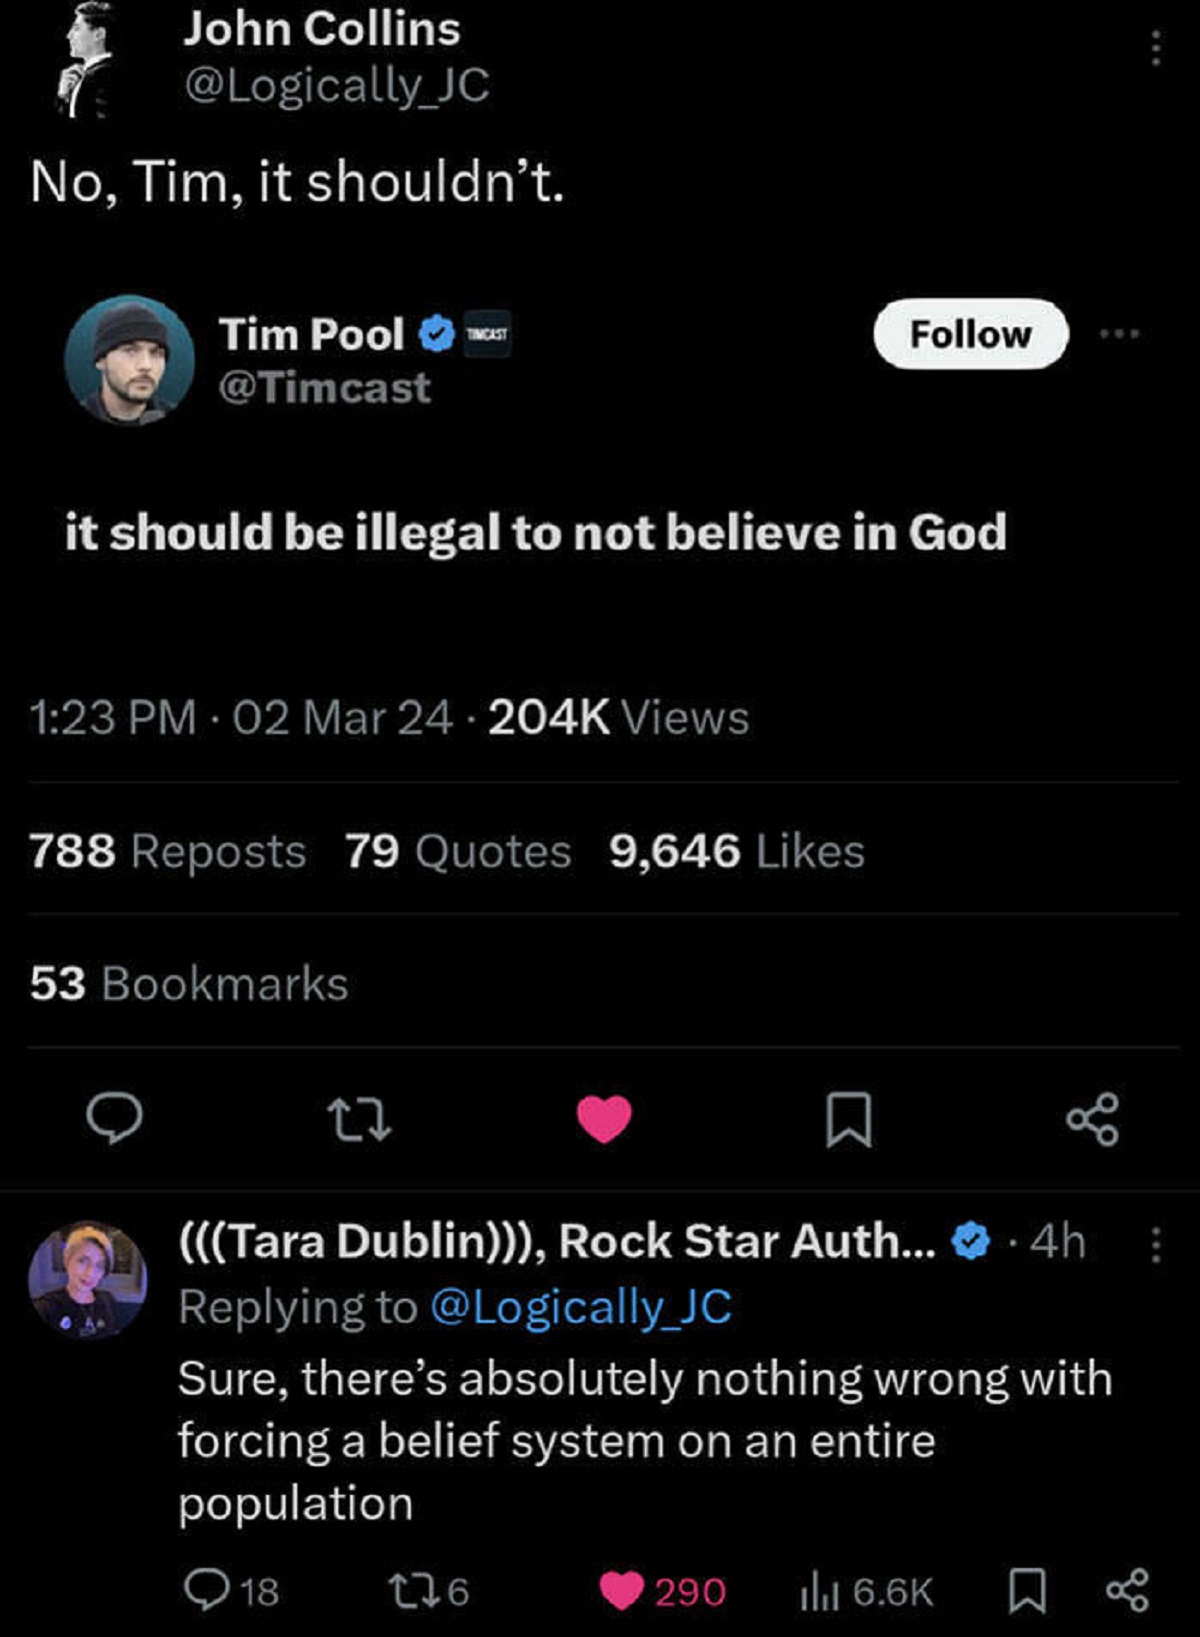 screenshot - John Collins No, Tim, it shouldn't. Tim Pool Tdd it should be illegal to not believe in God 02 Mar Views 788 Reposts 79 Quotes 9,646 53 Bookmarks 27 Tara Dublin, Rock Star Auth.... 4h Sure, there's absolutely nothing wrong with forcing a beli